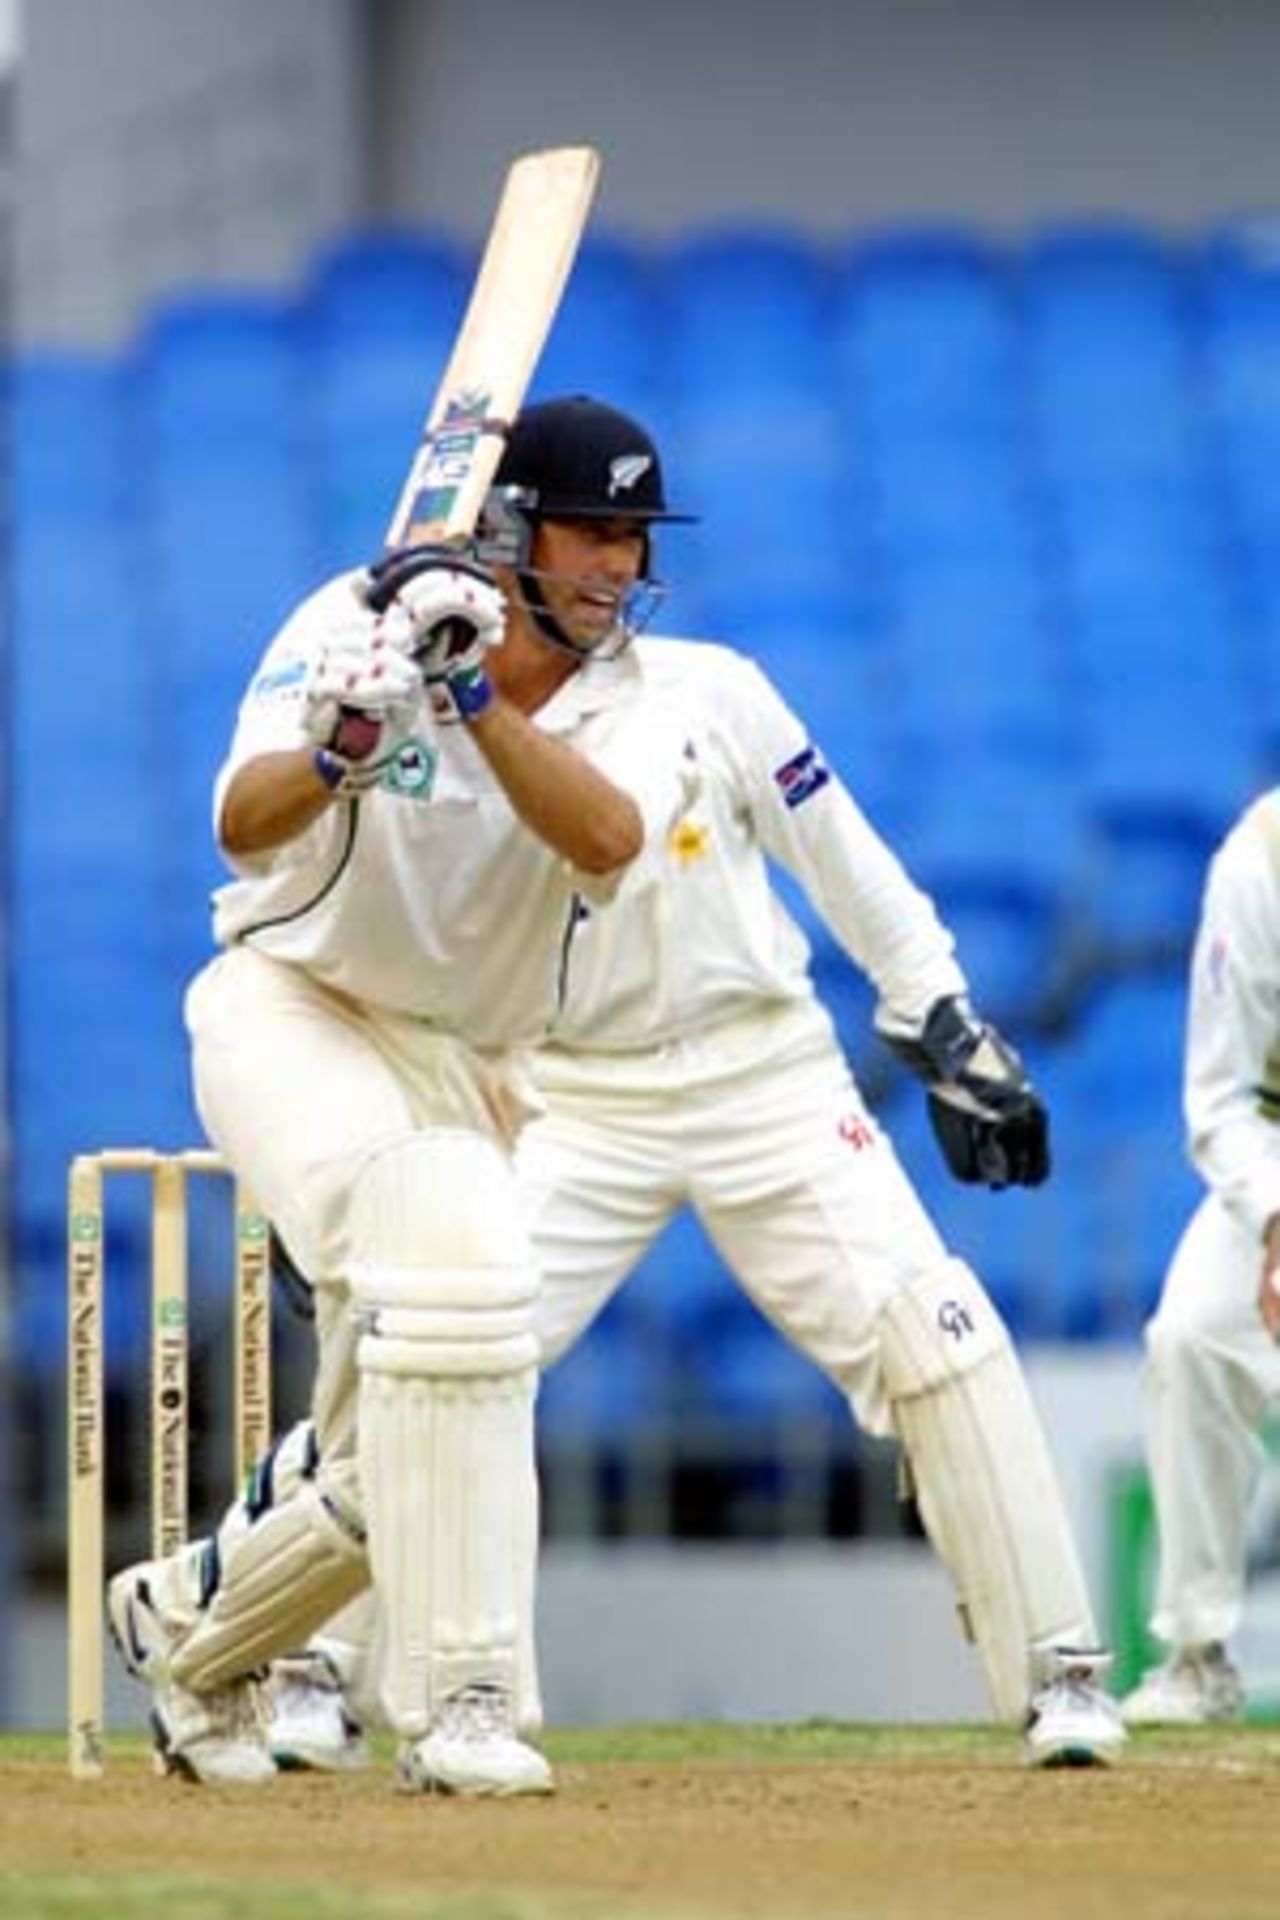 New Zealand batsman Stephen Fleming drives a ball from Pakistan off spinner Saqlain Mushtaq into the covers while wicket-keeper Moin Khan (obscured) looks on. Fleming ended the second day's play on 32 not out. 1st Test: New Zealand v Pakistan at Eden Park, Auckland, 8-12 March 2001 (9 March 2001).